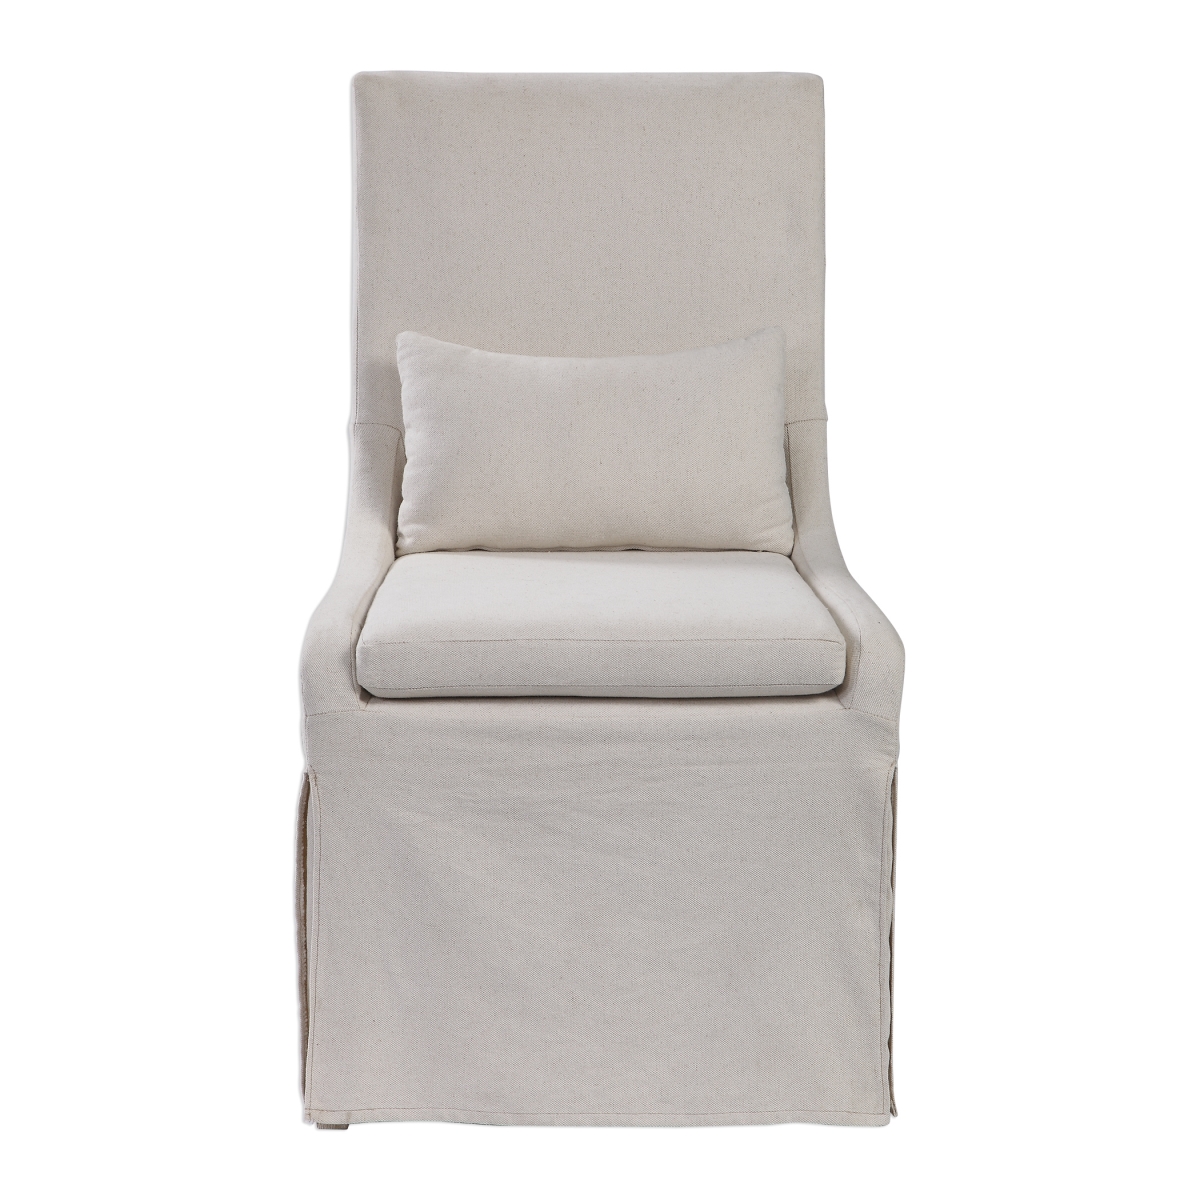 Picture of 212 Main 23493 20 in. Coley Linen Armless Chair  White